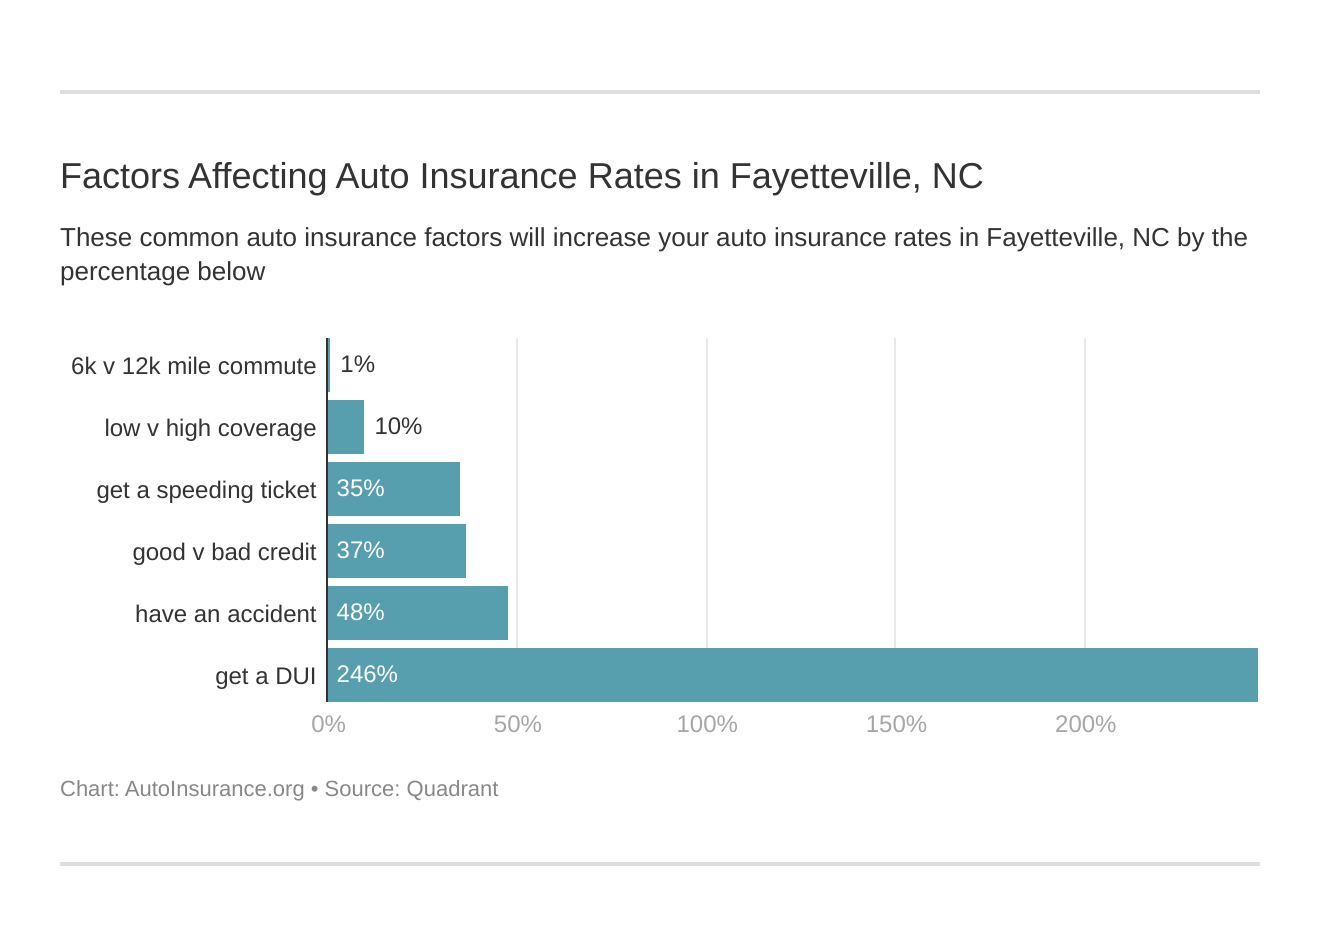 Factors Affecting Auto Insurance Rates in Fayetteville, NC